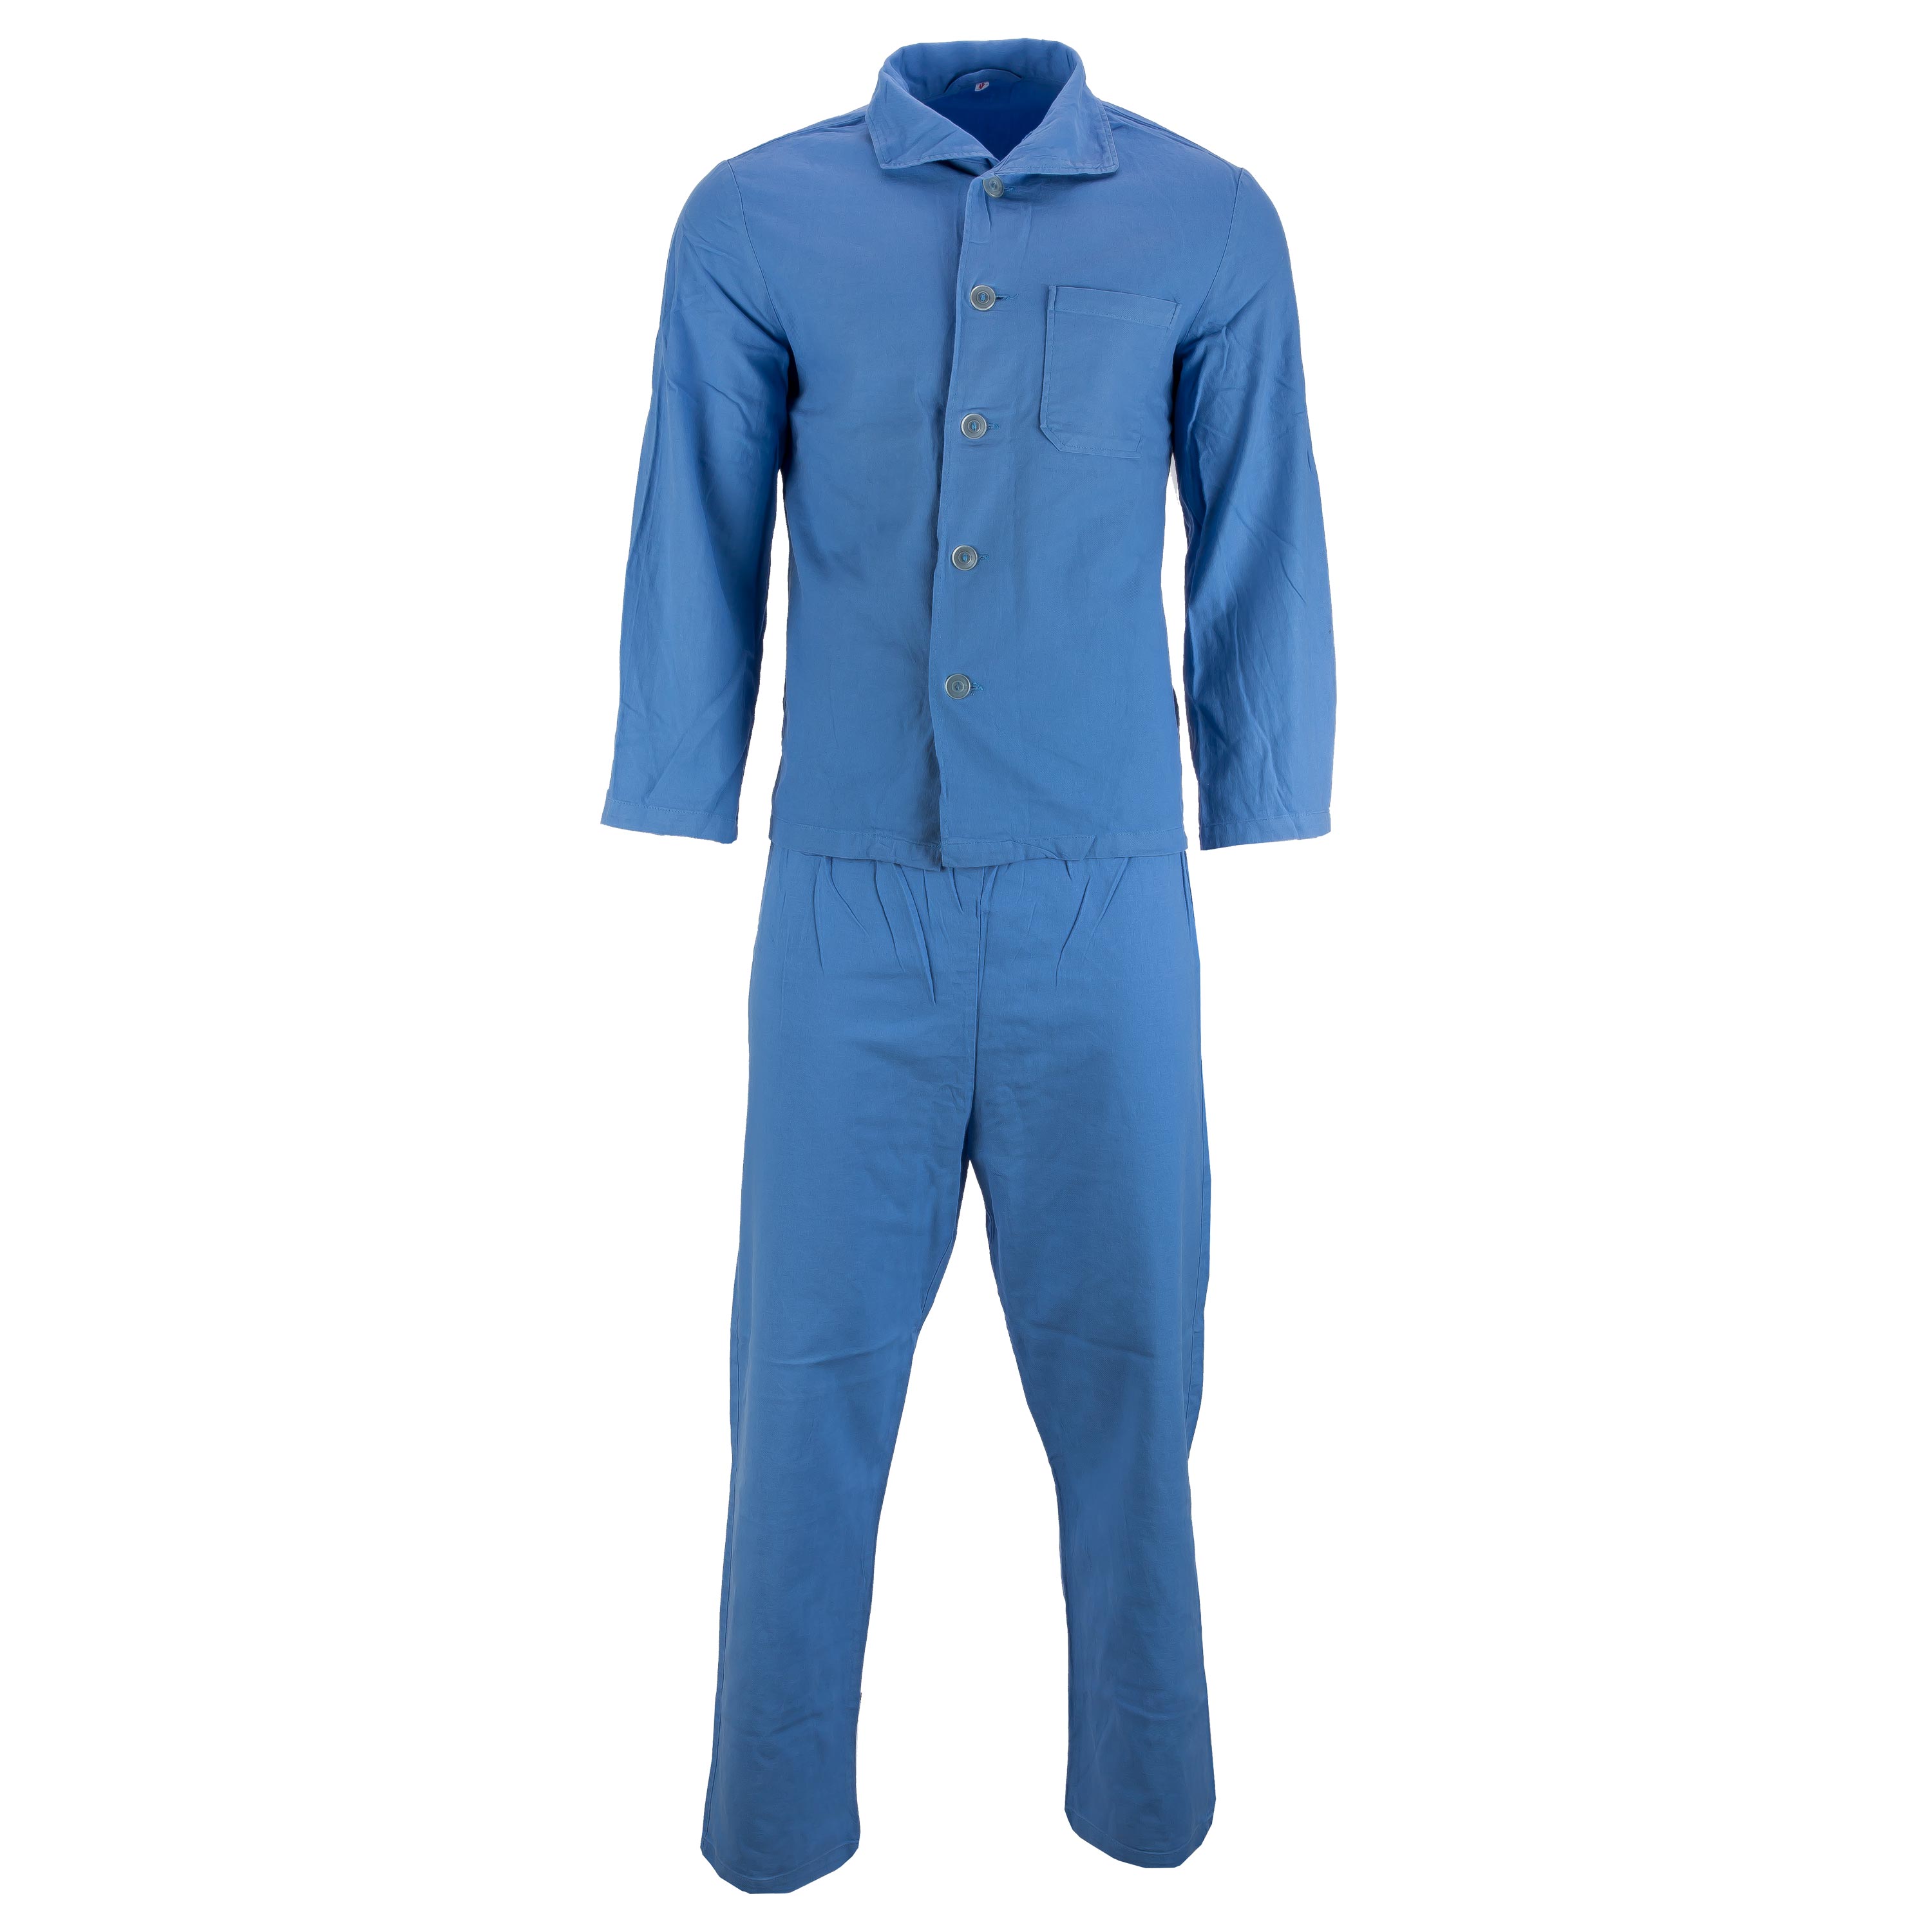 Purchase the Used German Armed Forces Pajamas light blue by ASMC